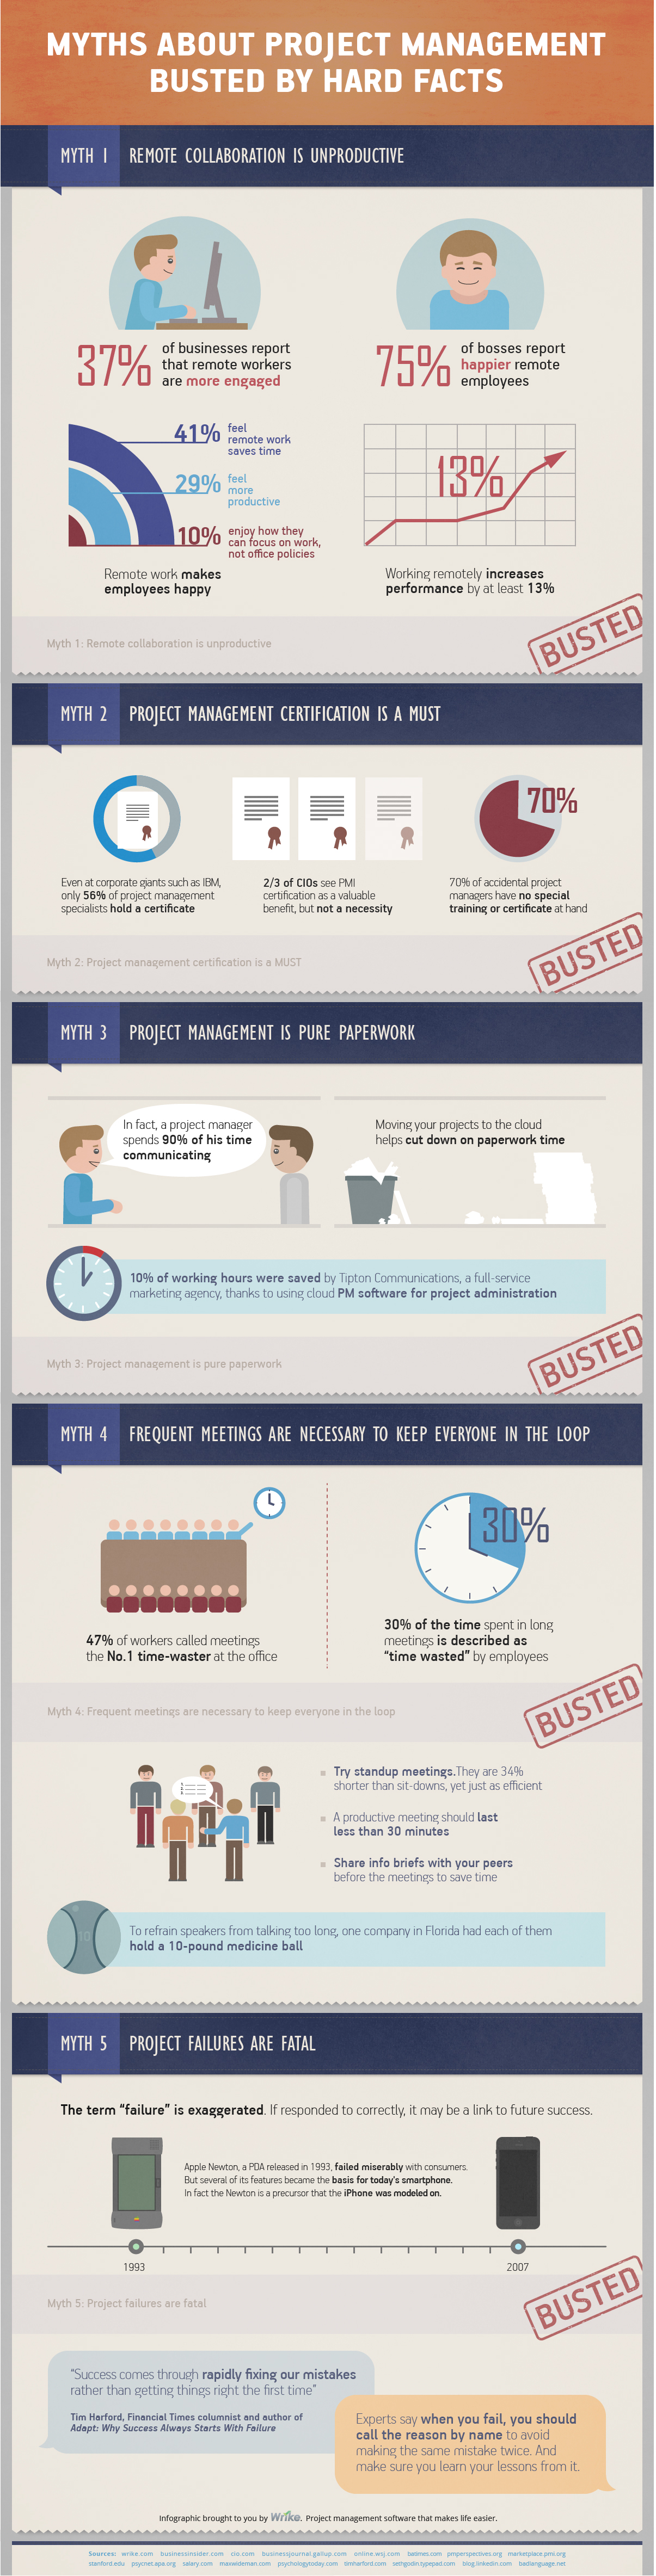 Myths About Project Management Busted by Hard Facts